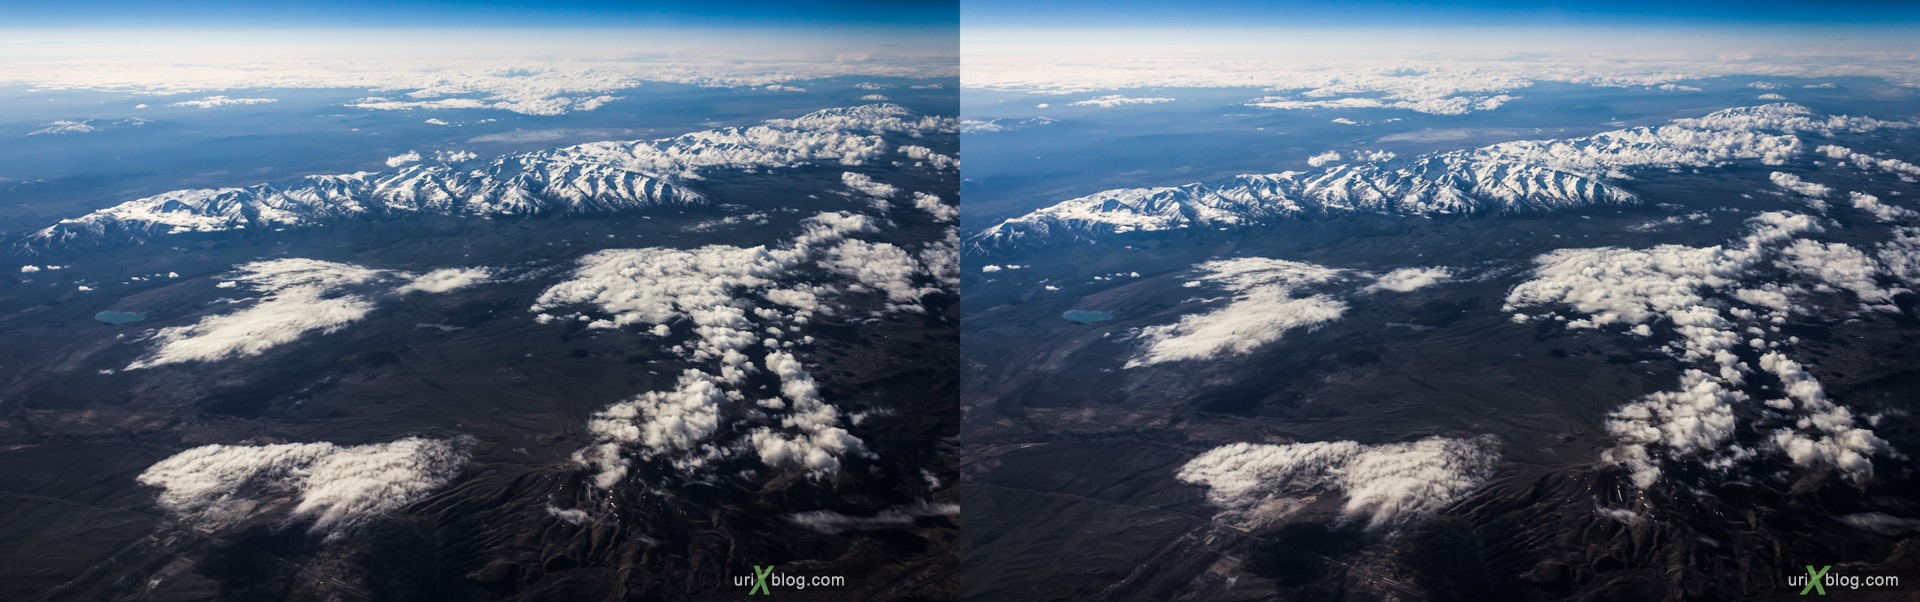 2013, Nevada, Rocky mountains, USA, panorama, airplane, black and white, bw, snow, ice, clouds, horizon, 3D, stereo pair, cross-eyed, crossview, cross view stereo pair, stereoscopic